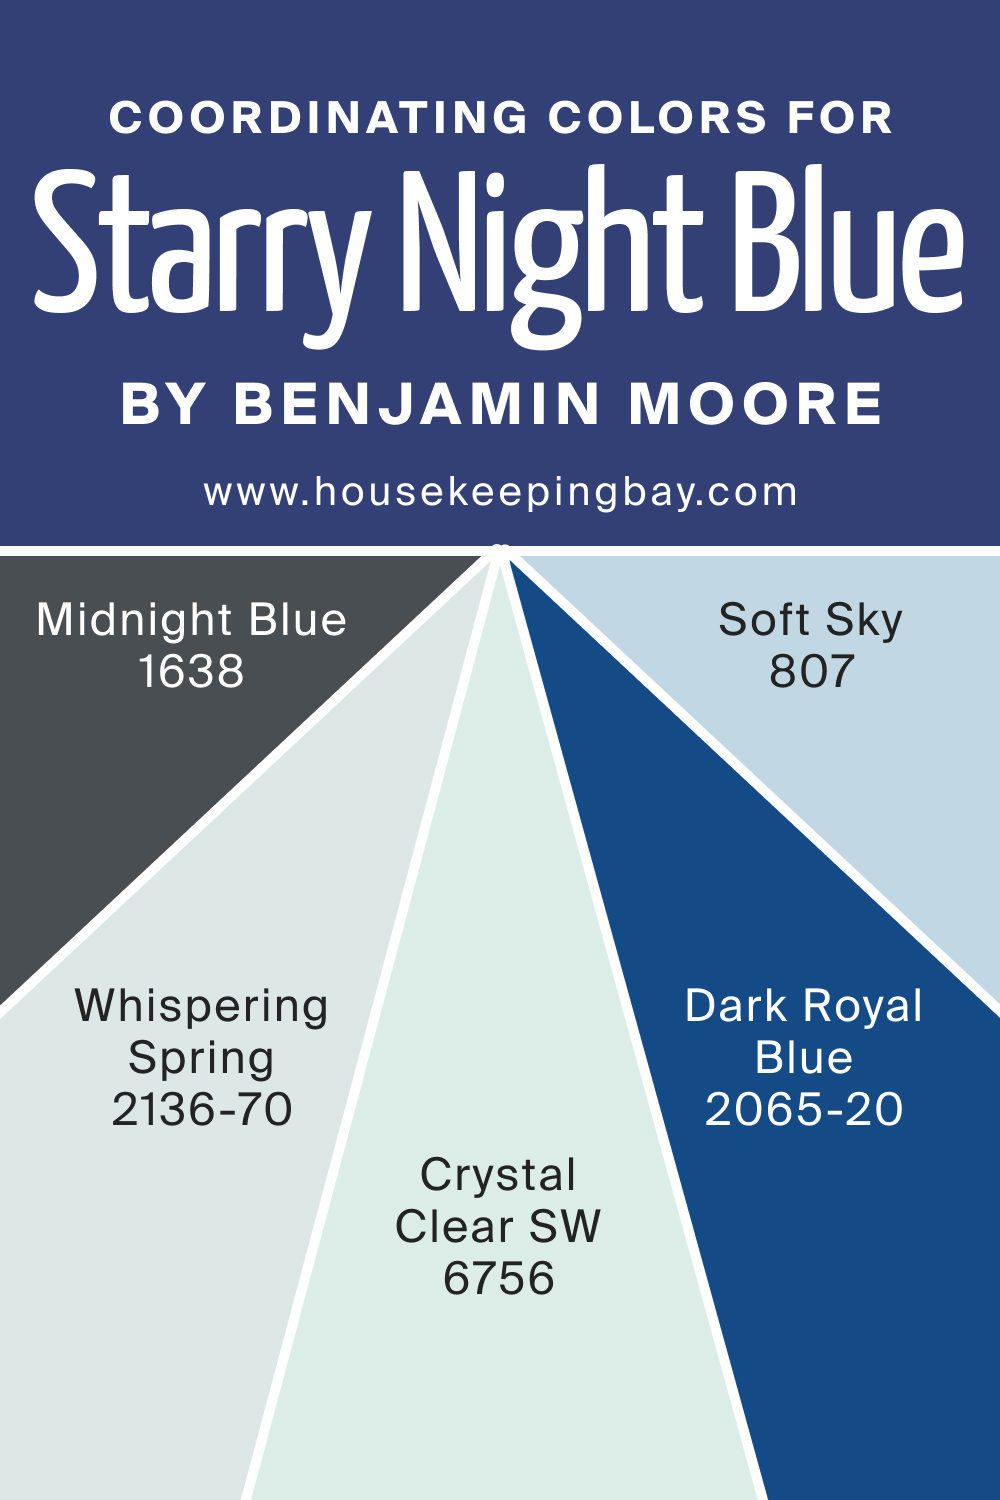 Coordinating Colors for Starry Night Blue 2067 20 by Benjamin Moore